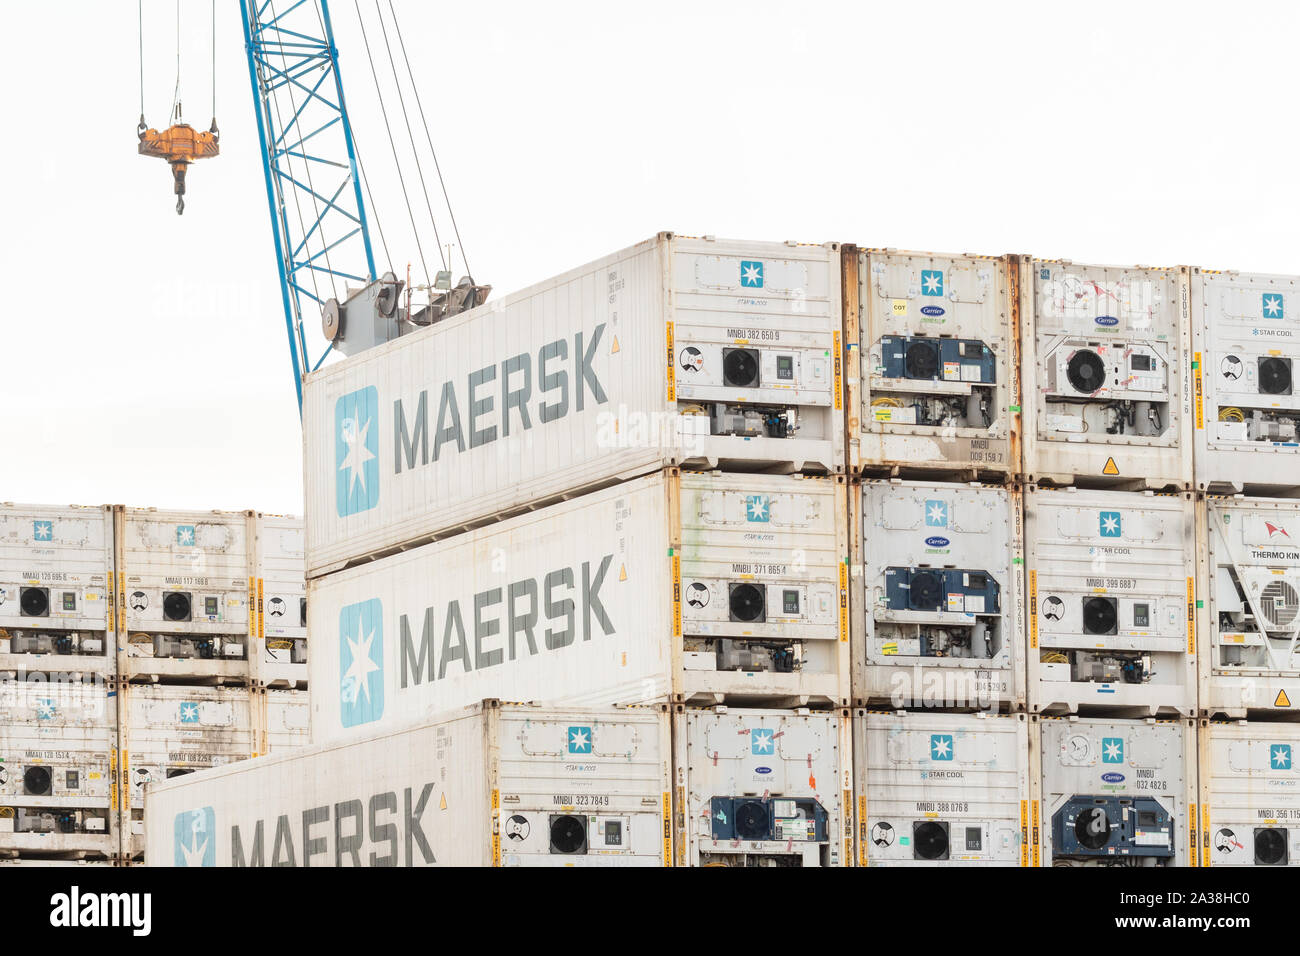 Maersk Container Kühlcontainer Stockfoto